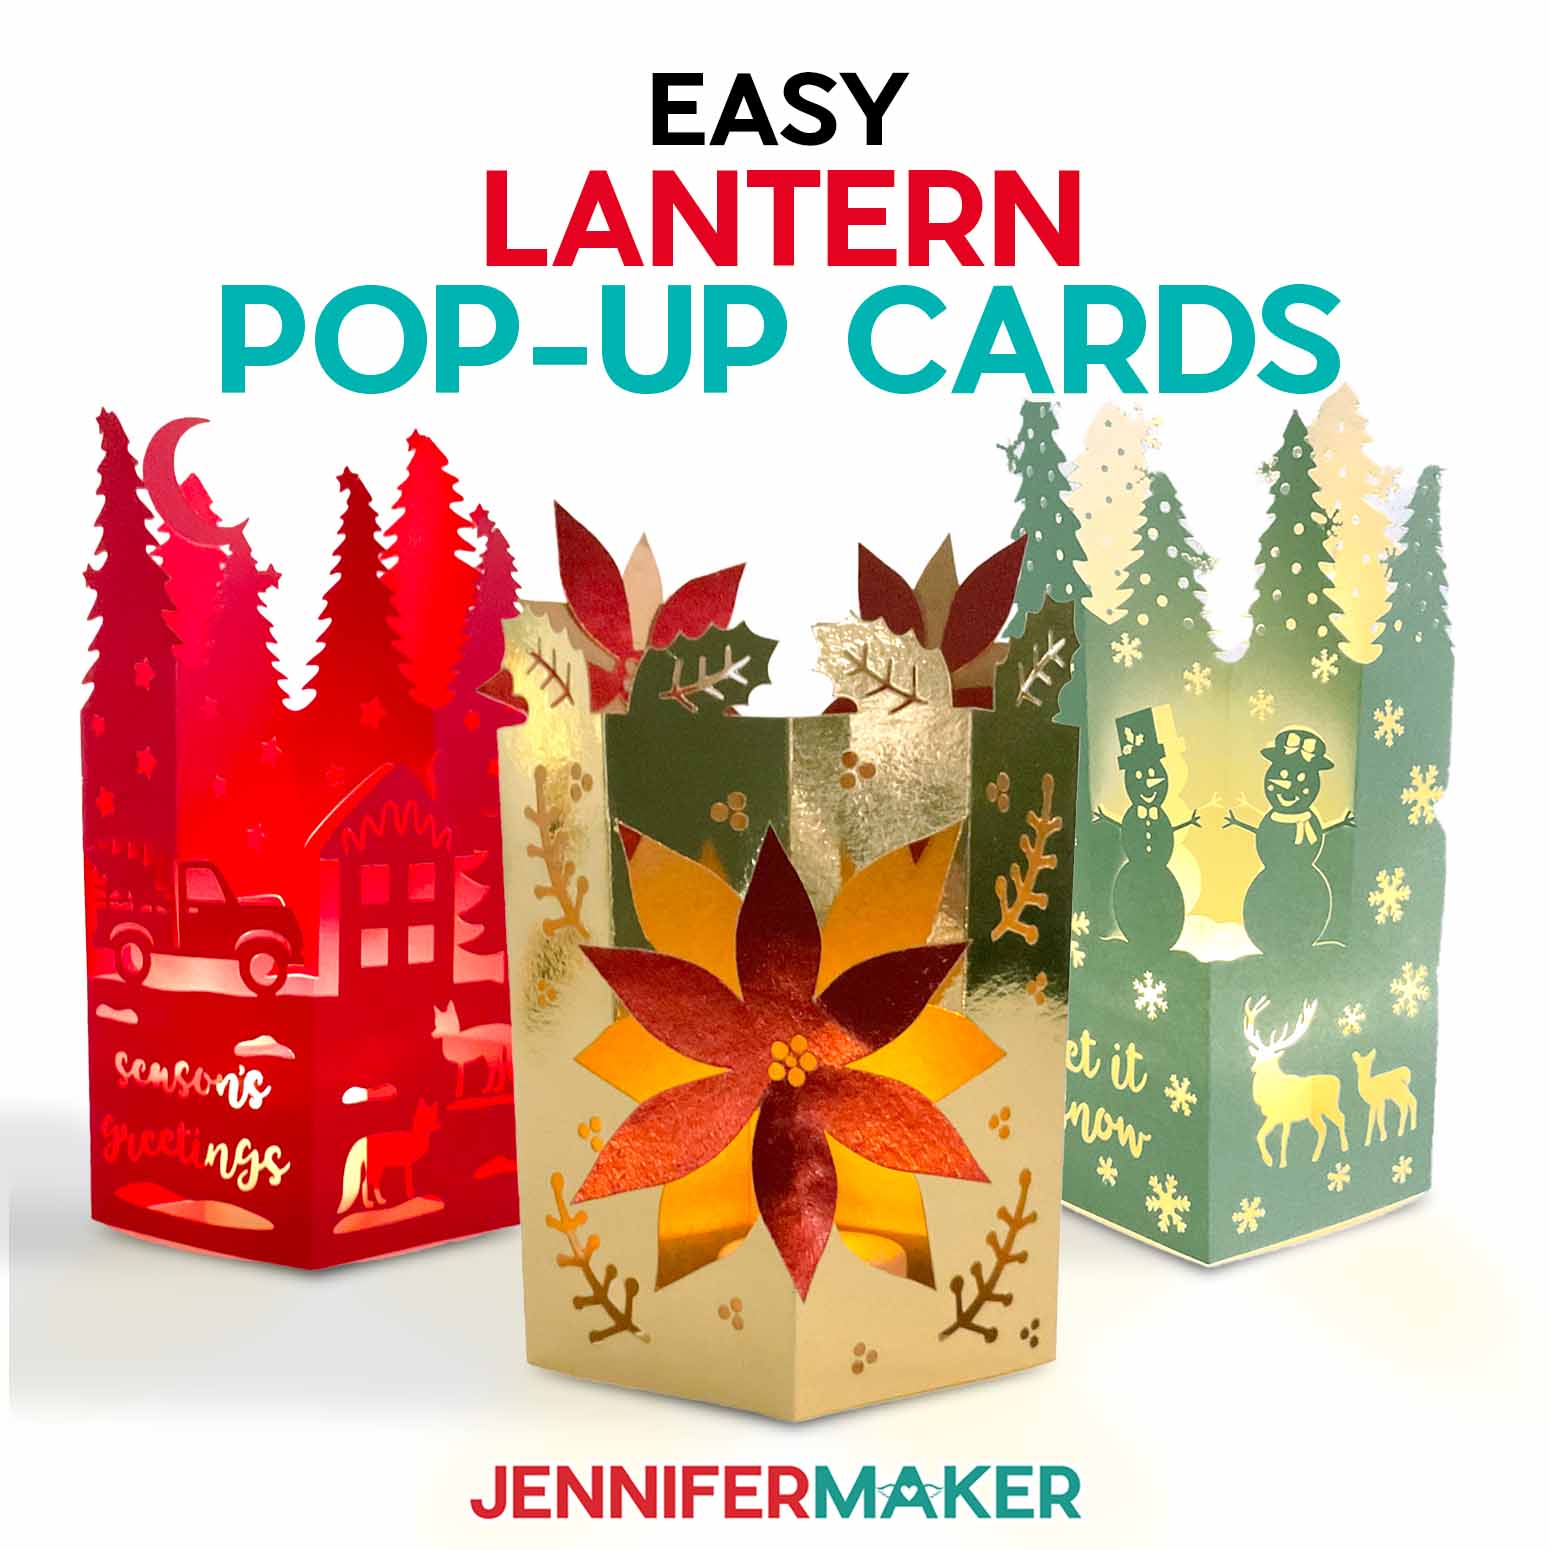 Make easy lantern pop-up cards with JenniferMaker's tutorial! Three beautiful pop-up lantern cards with different holiday and seasonal-inspired colors and designs.